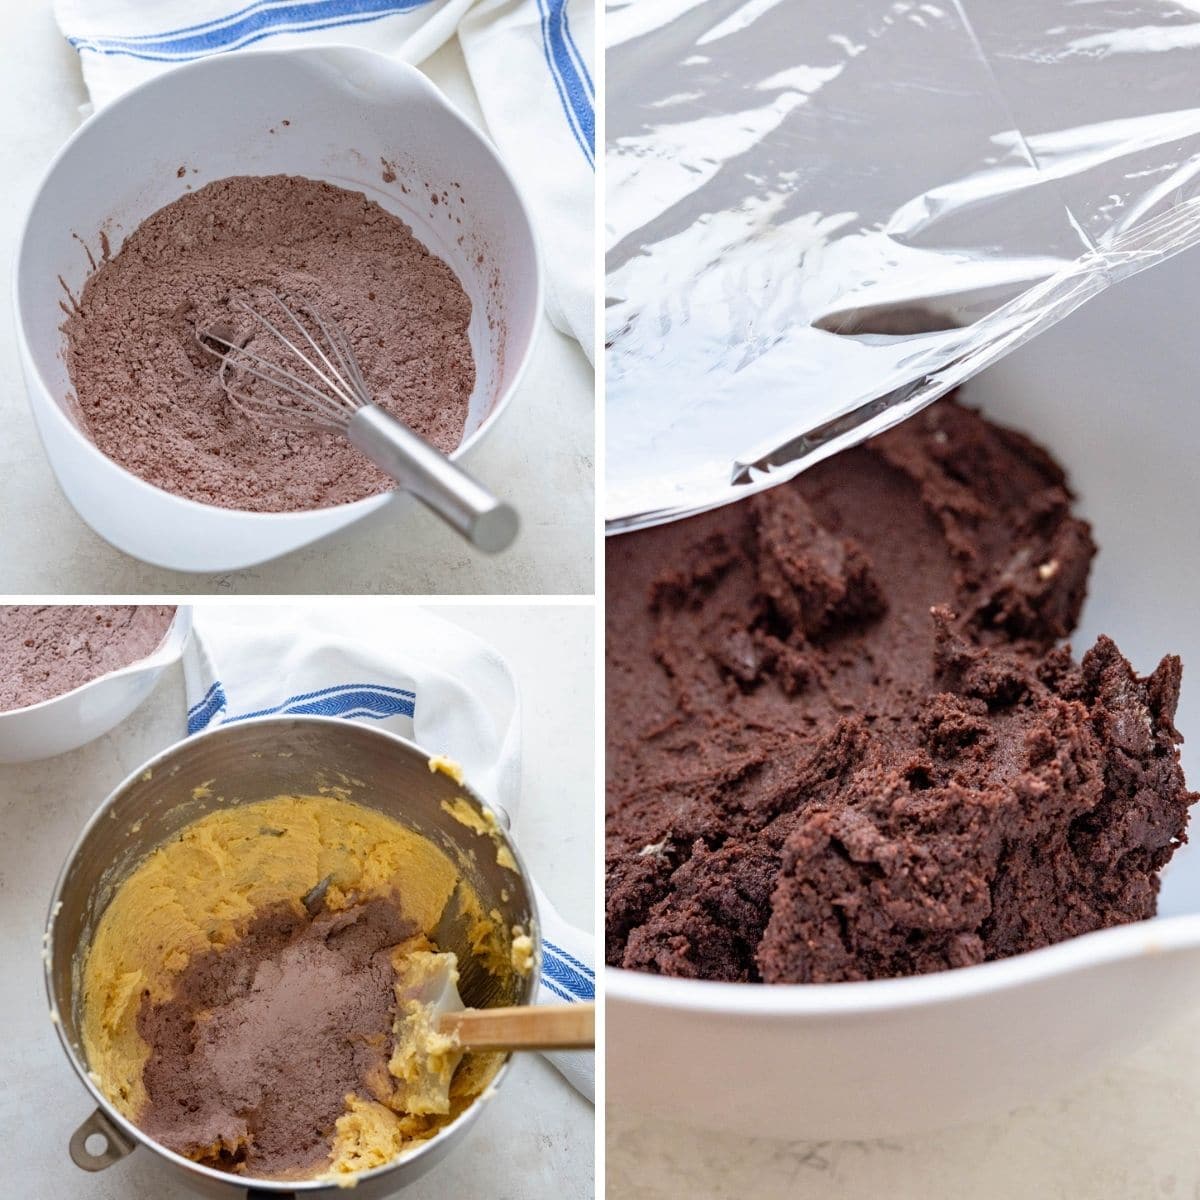 mixing the flour and cocoa mixture with the creamed butter and sugar.